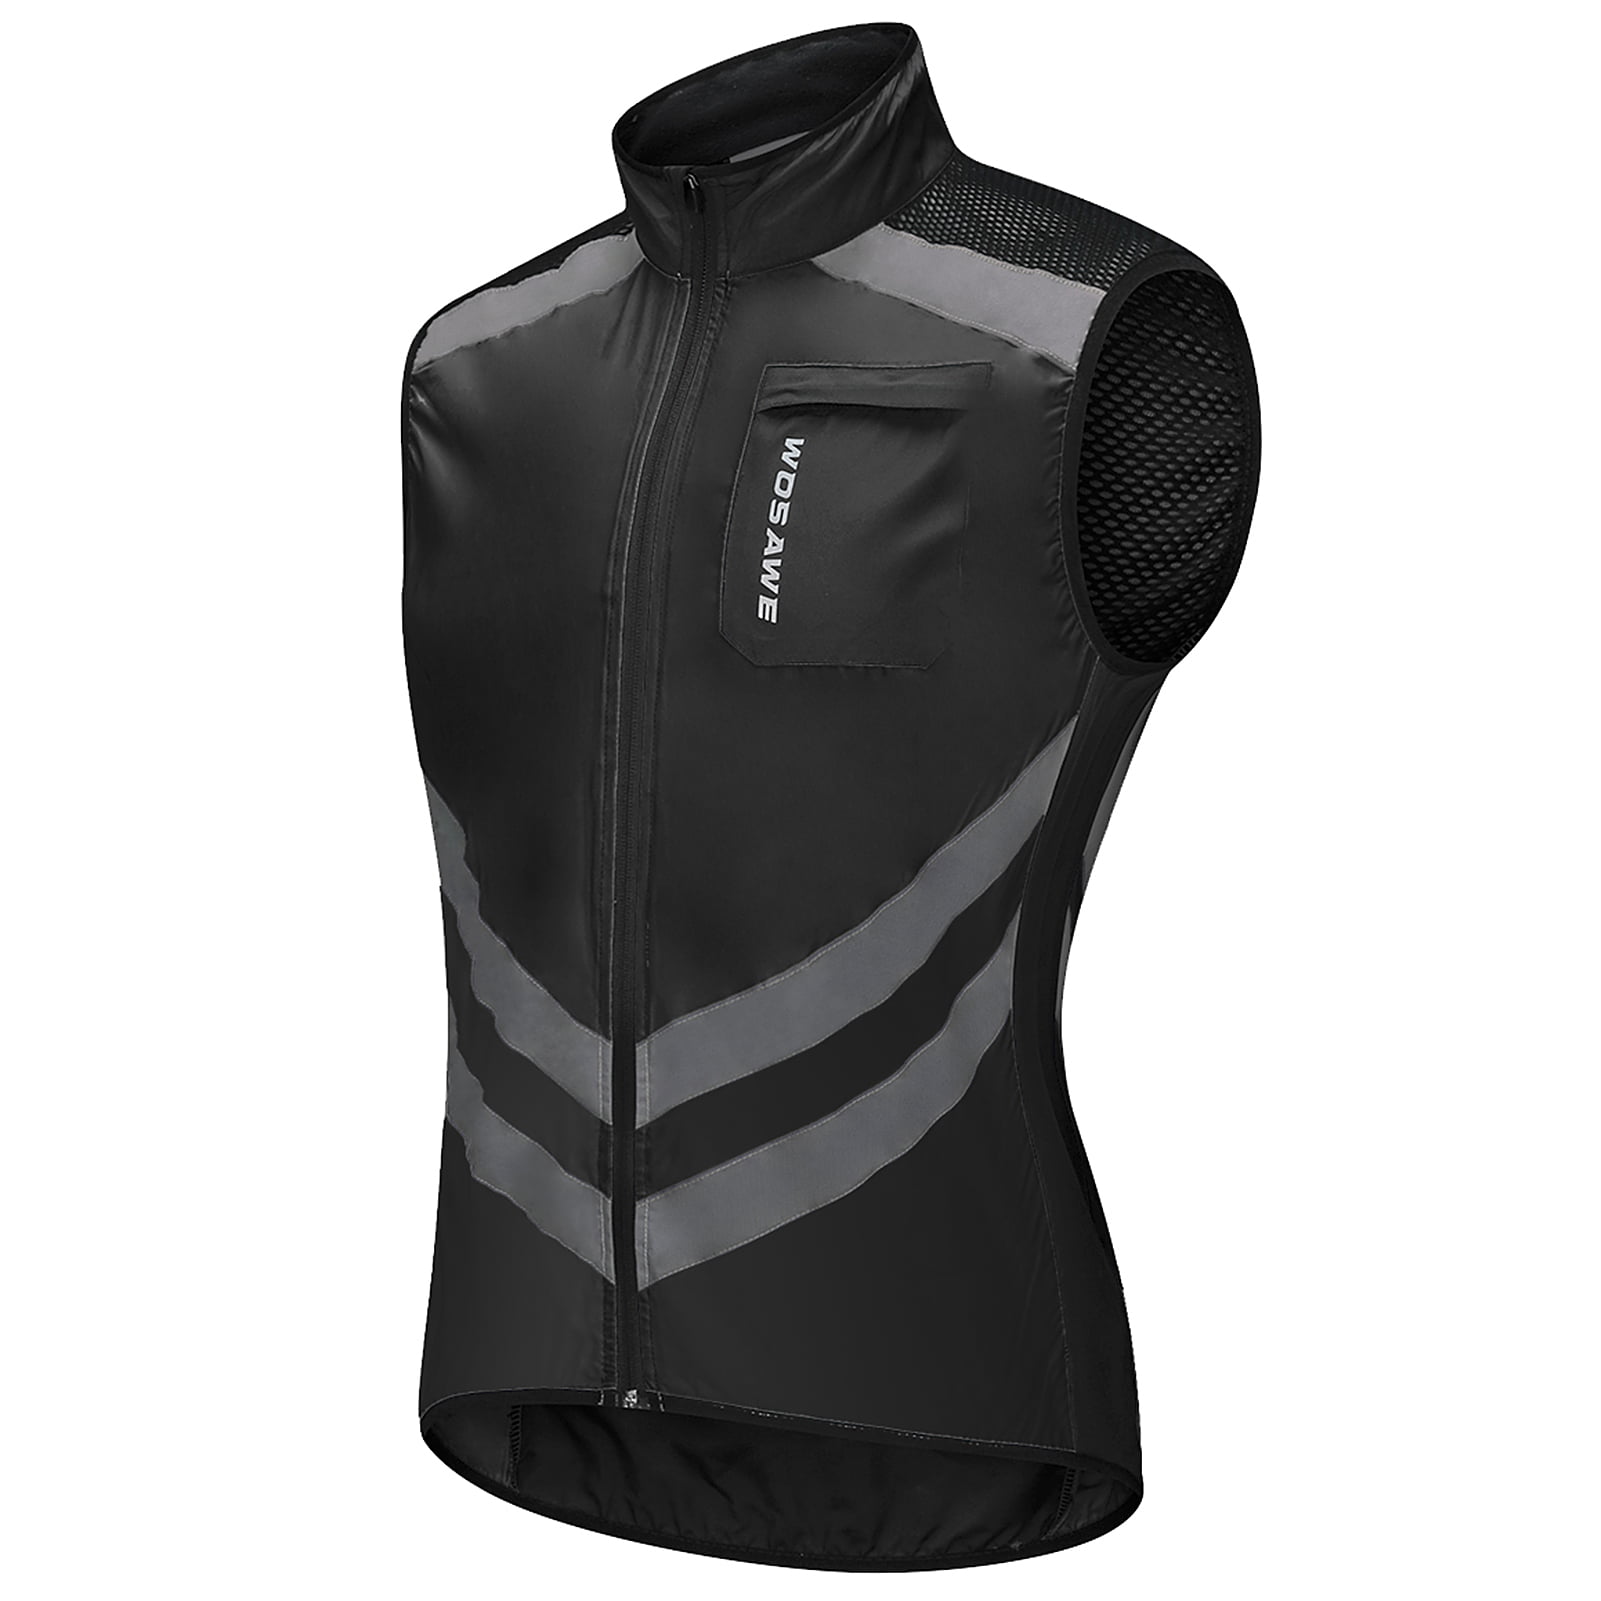 Details about   ARSUXEO Men's Ultrathin Lightweight Sleeveless Coat Jacket Running Cycling Y6V8 